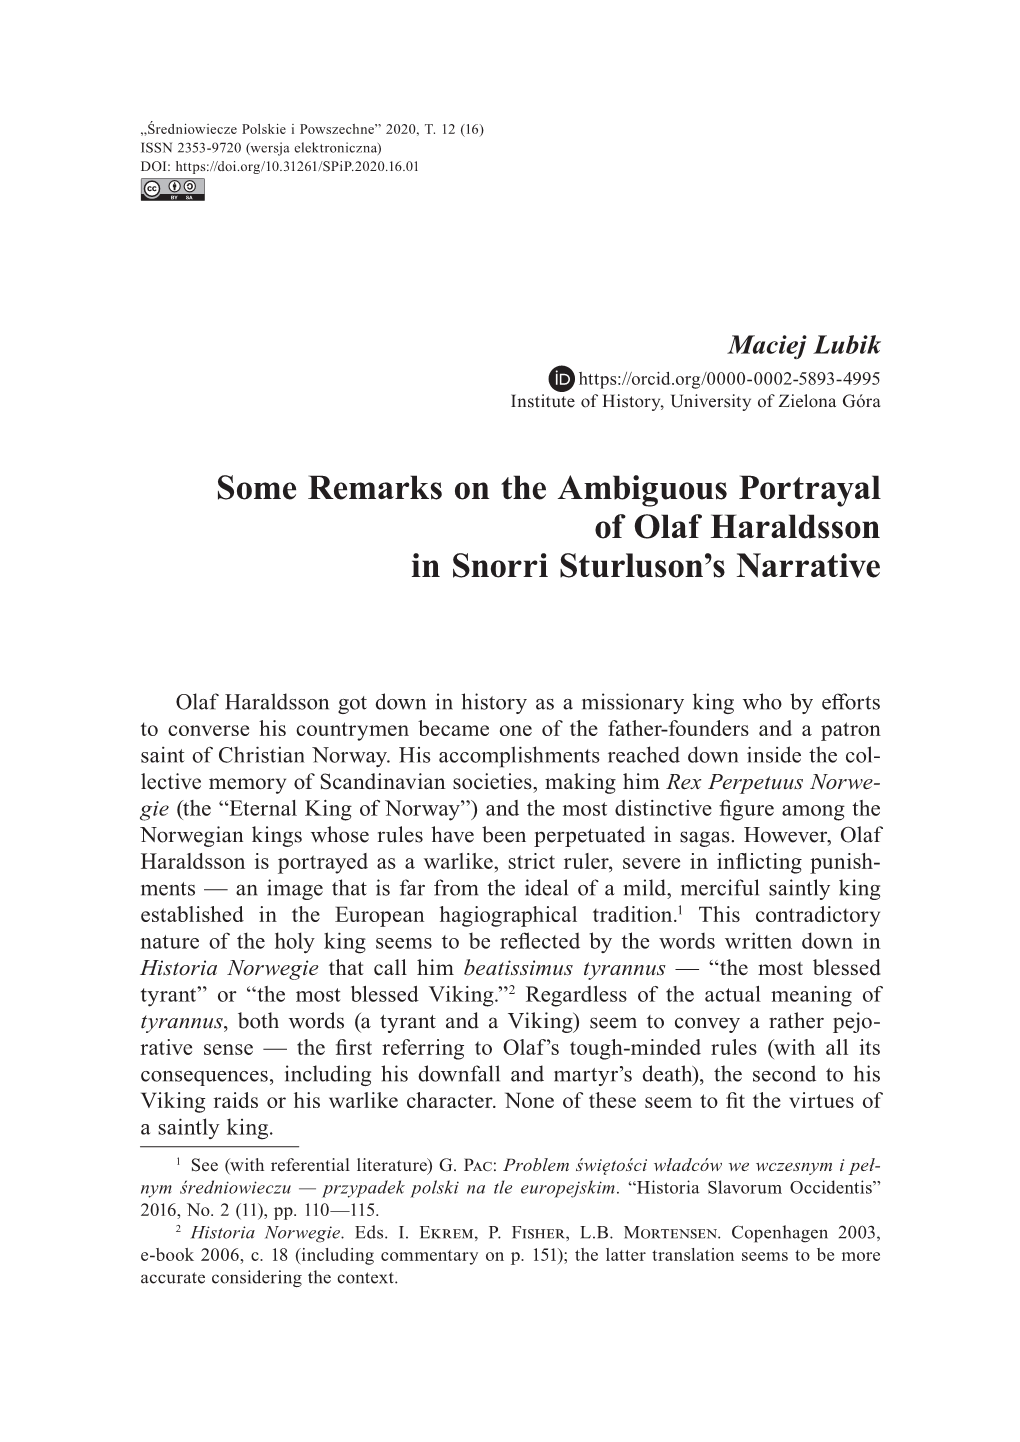 Some Remarks on the Ambiguous Portrayal of Olaf Haraldsson in Snorri Sturluson’S Narrative